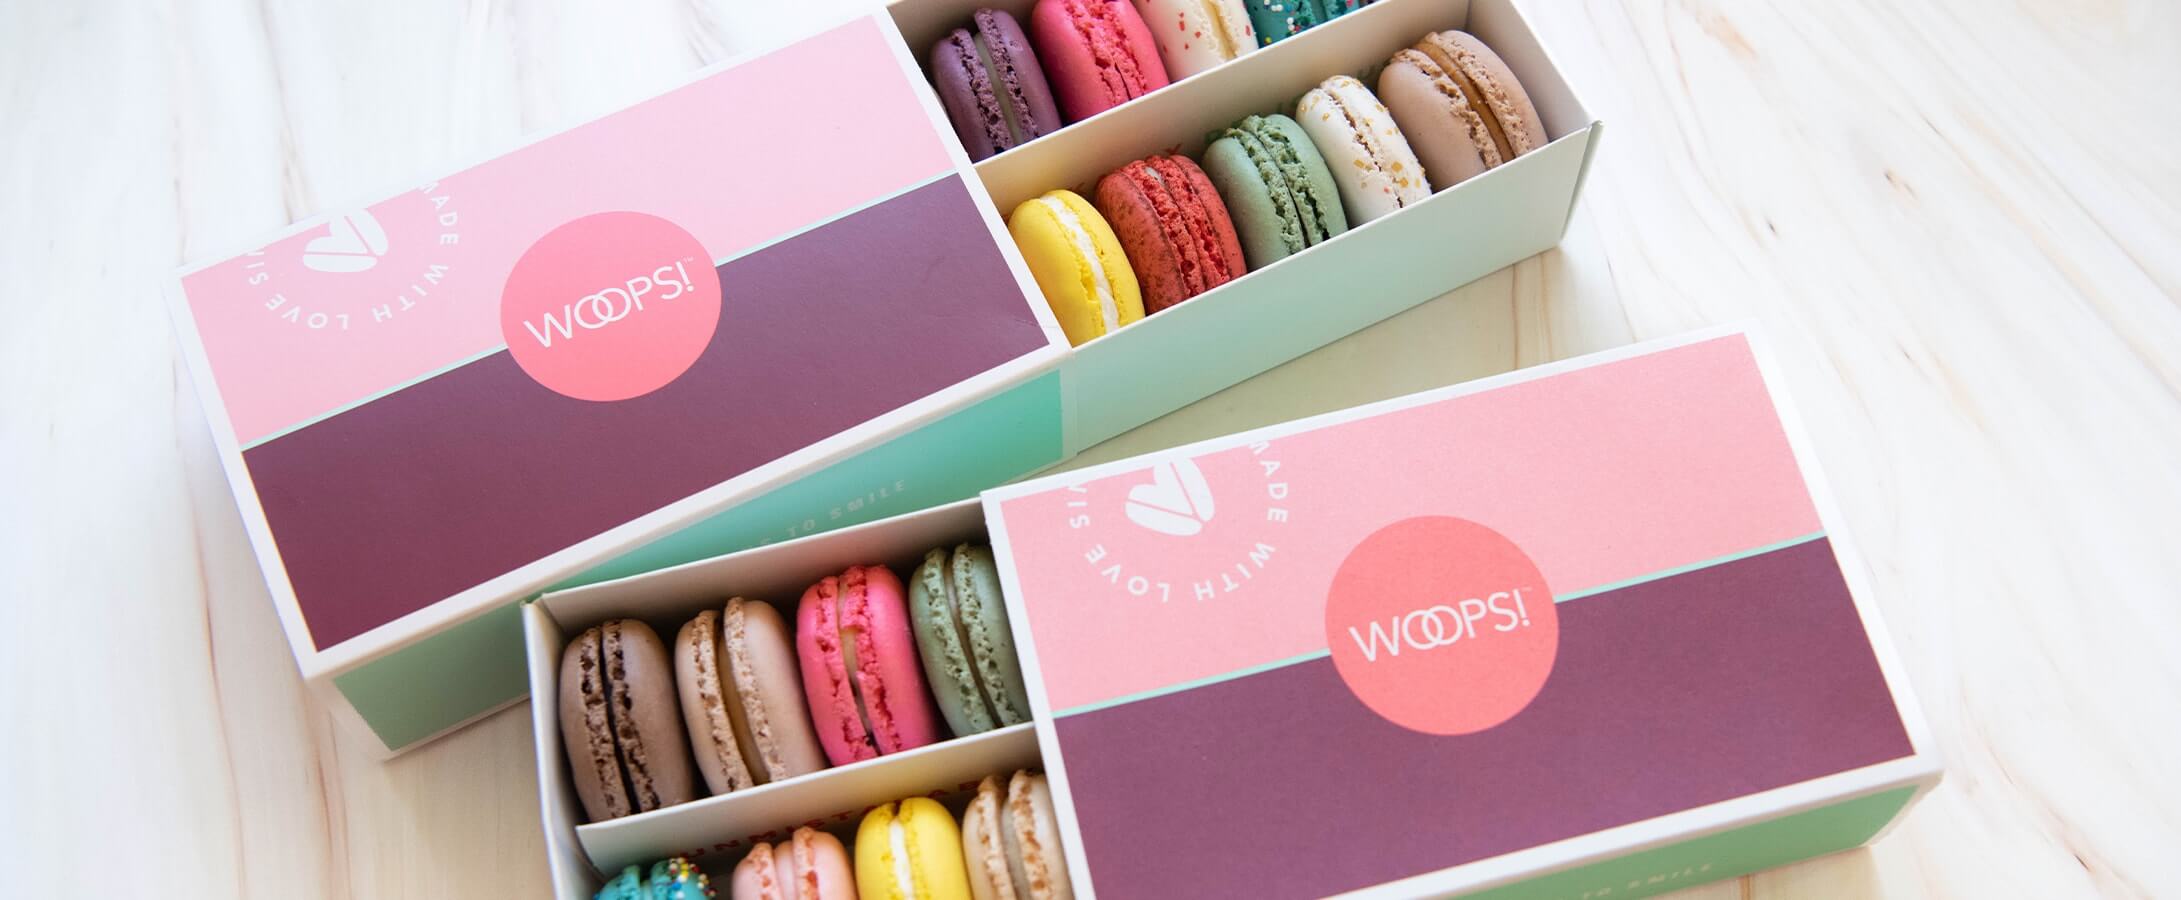 Two Woops! boxes of 12 macarons with assorted flavors.